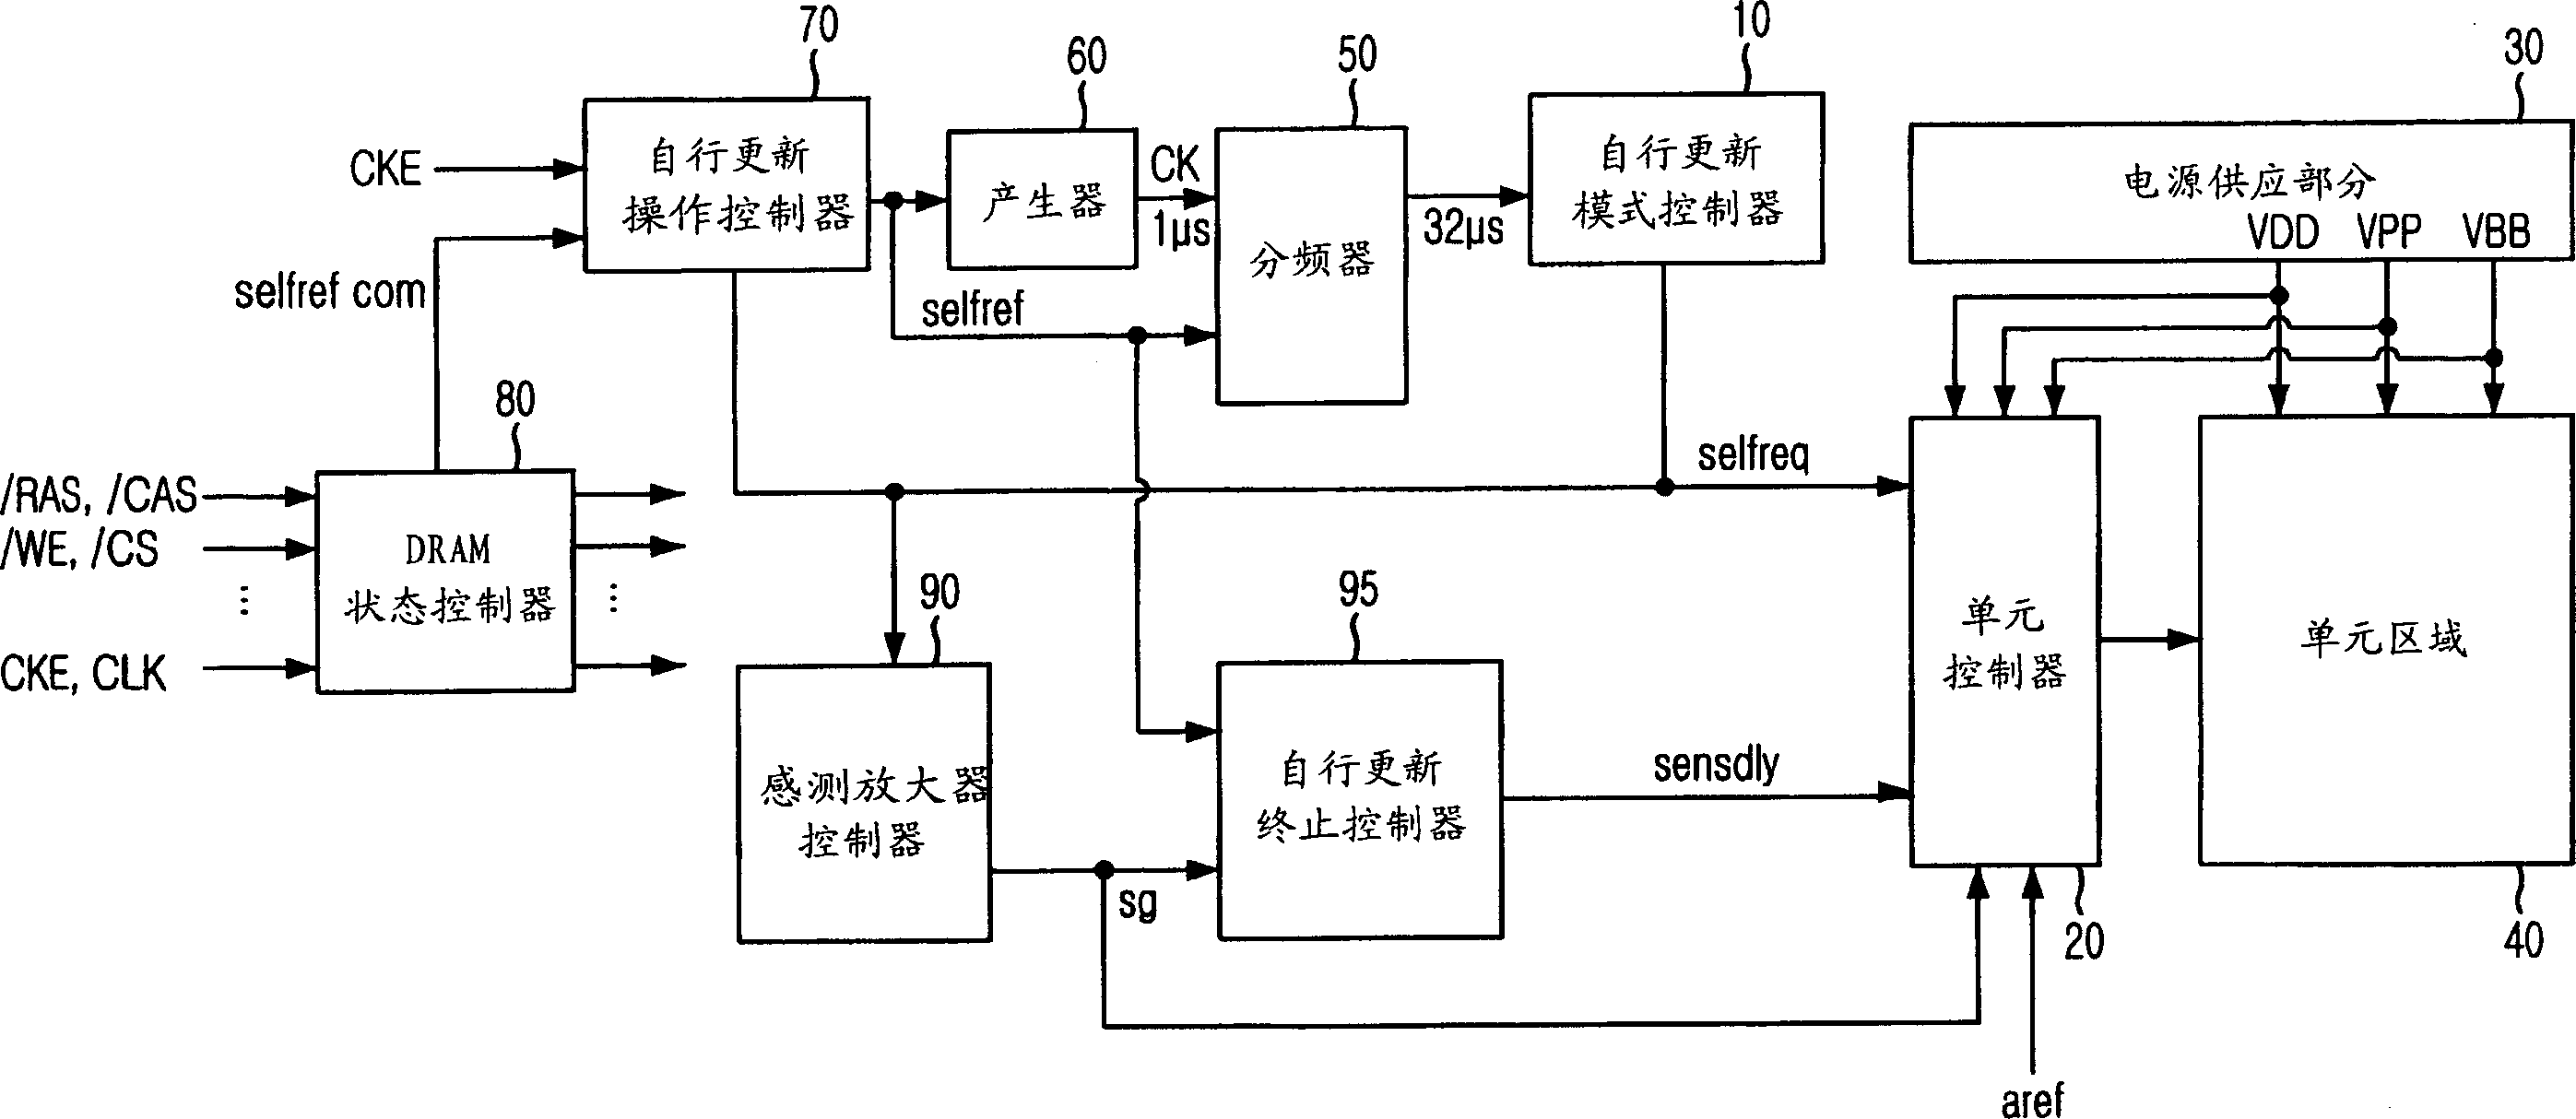 Semiconductor memory having self updating for reducing power consumption